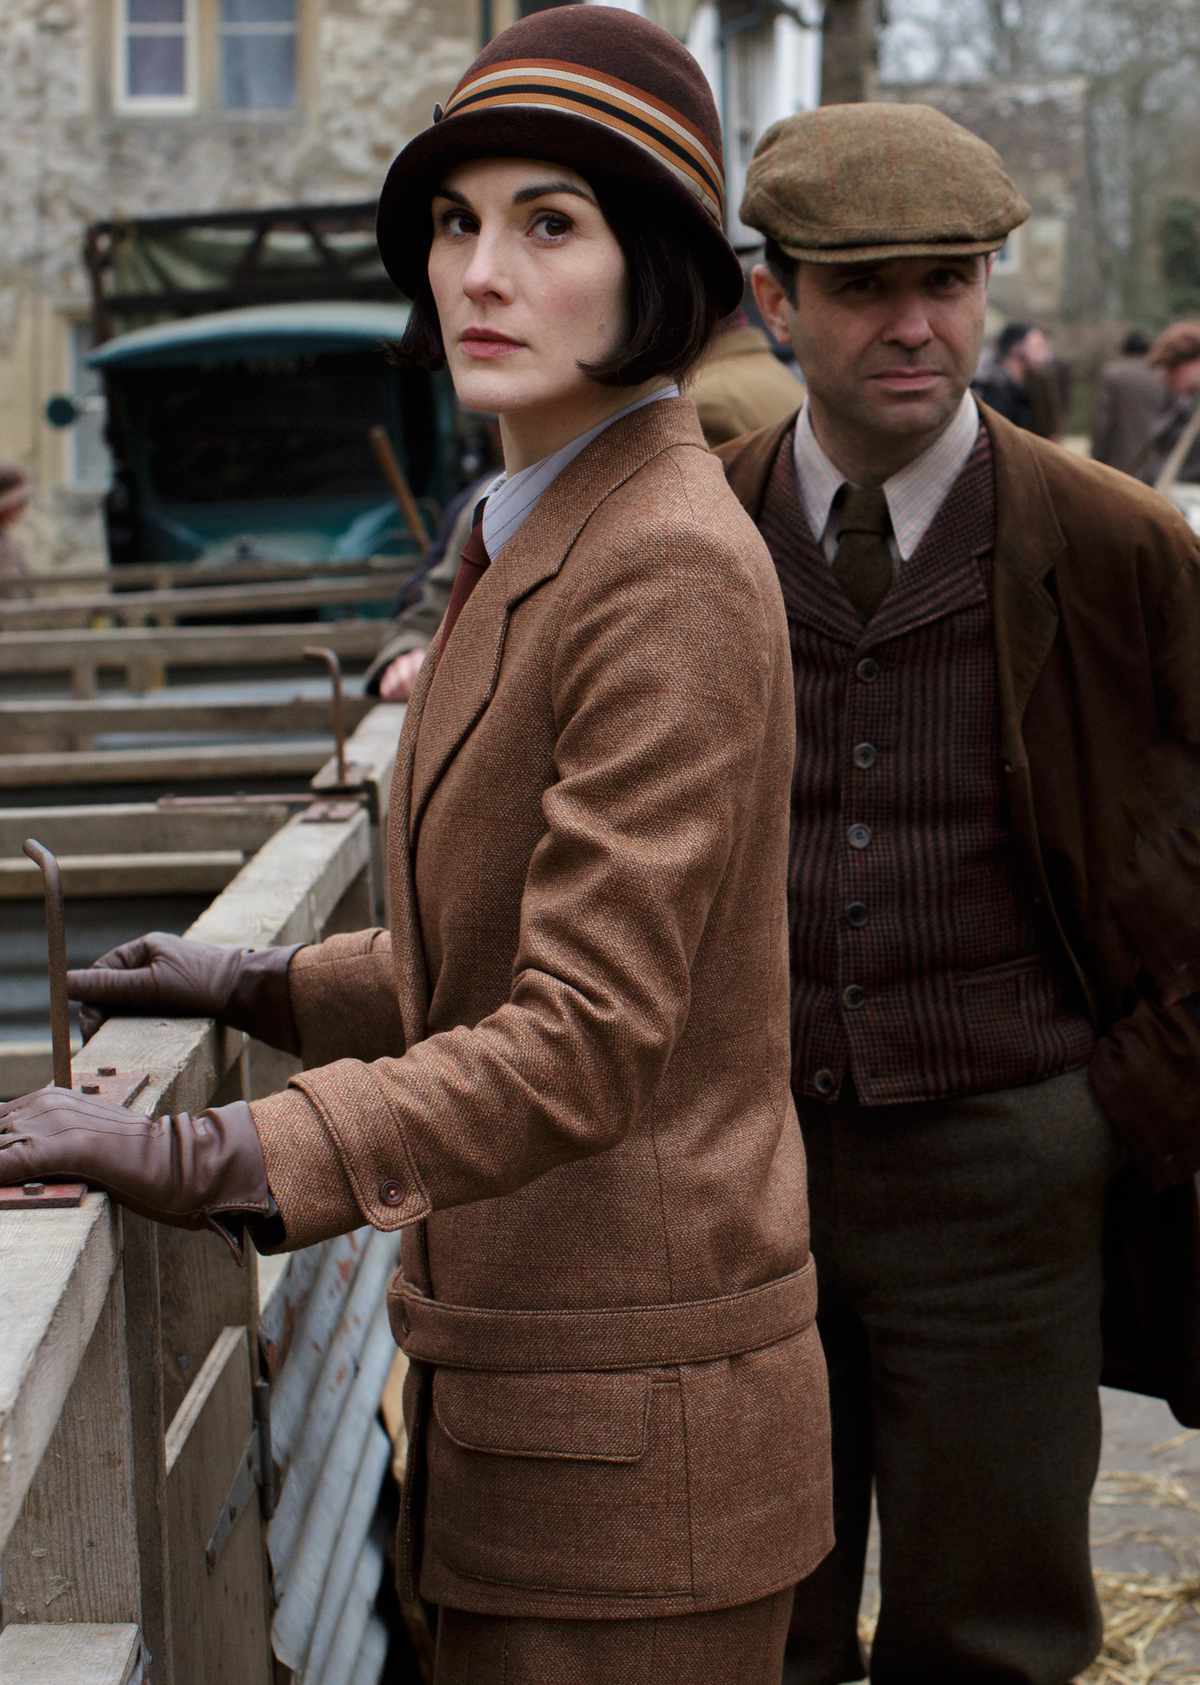 Michelle Dockery as Lady Mary and Andrew Scarborough as Mr. Drewe